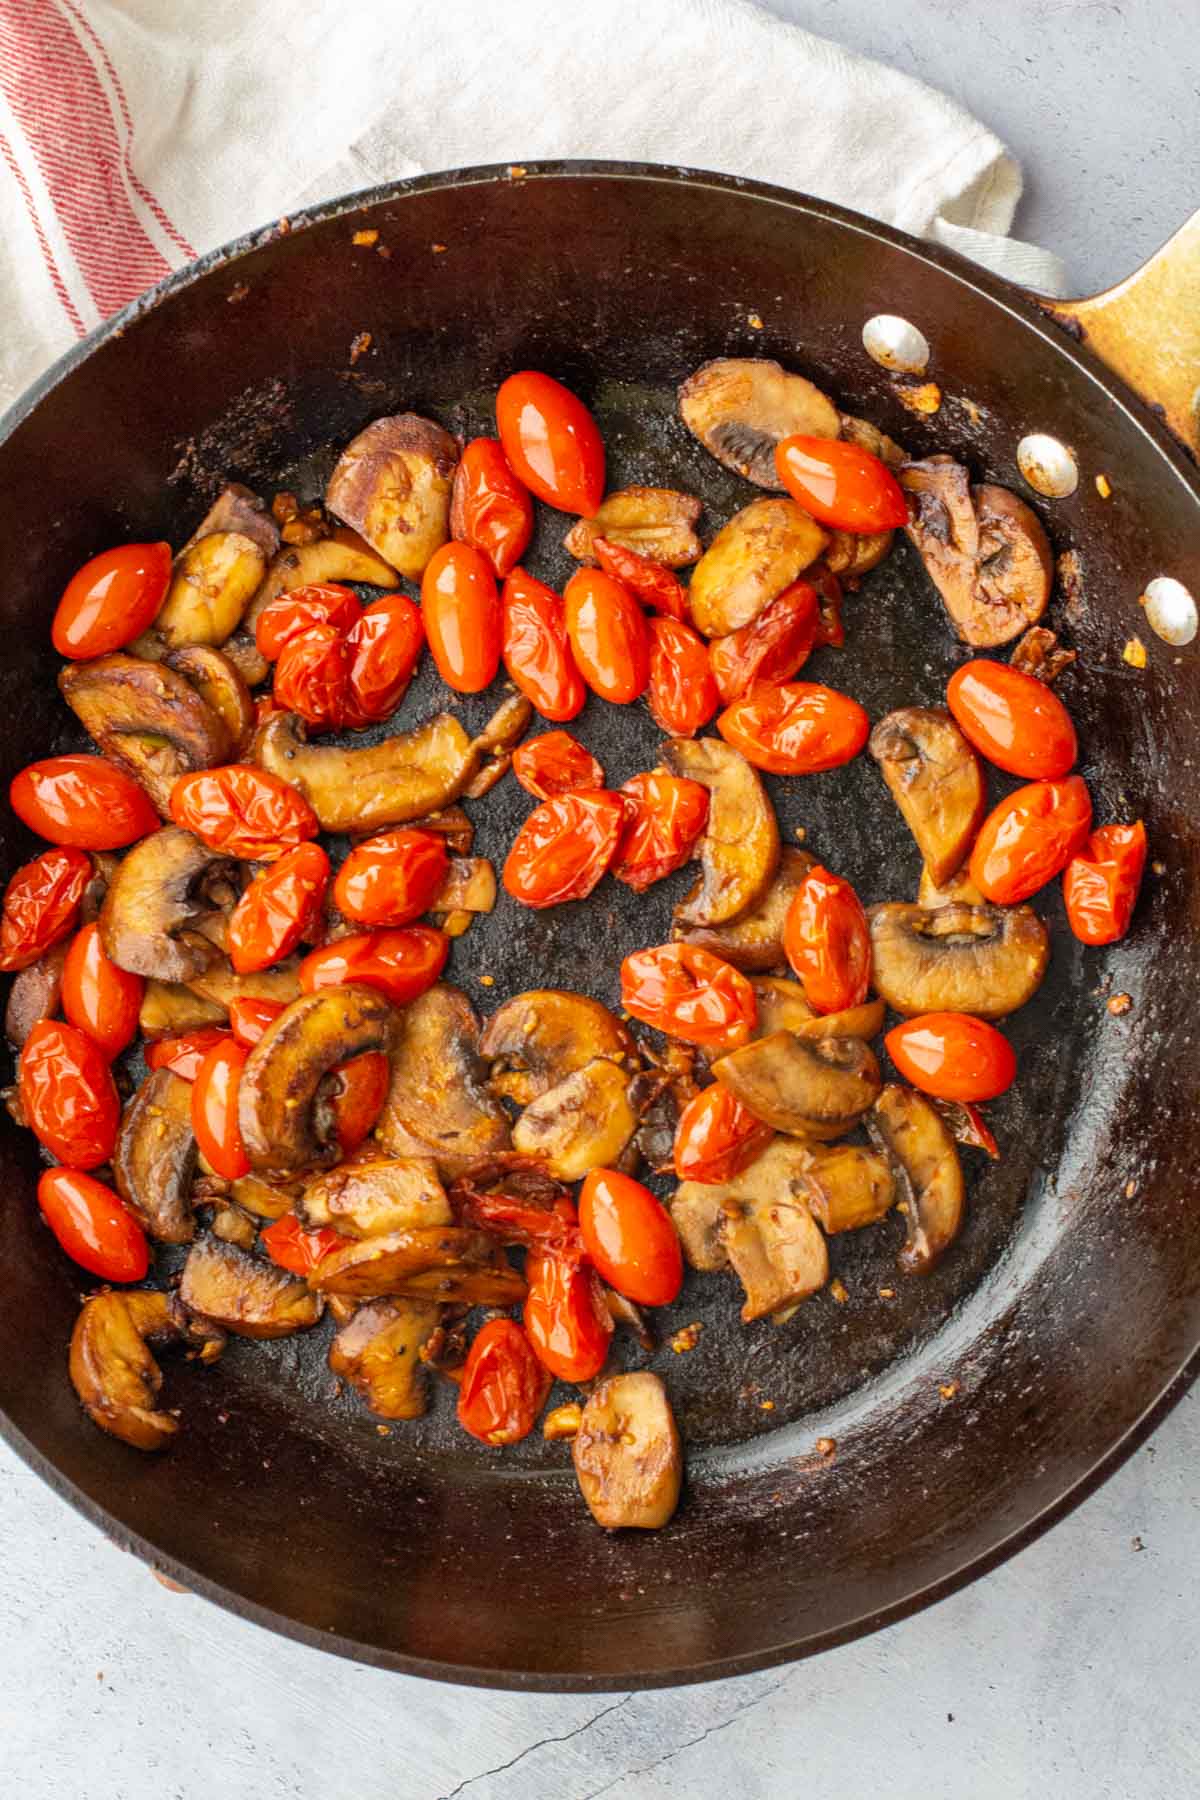 Cooking cherry tomatoes and mushrooms in a heavy skillet.